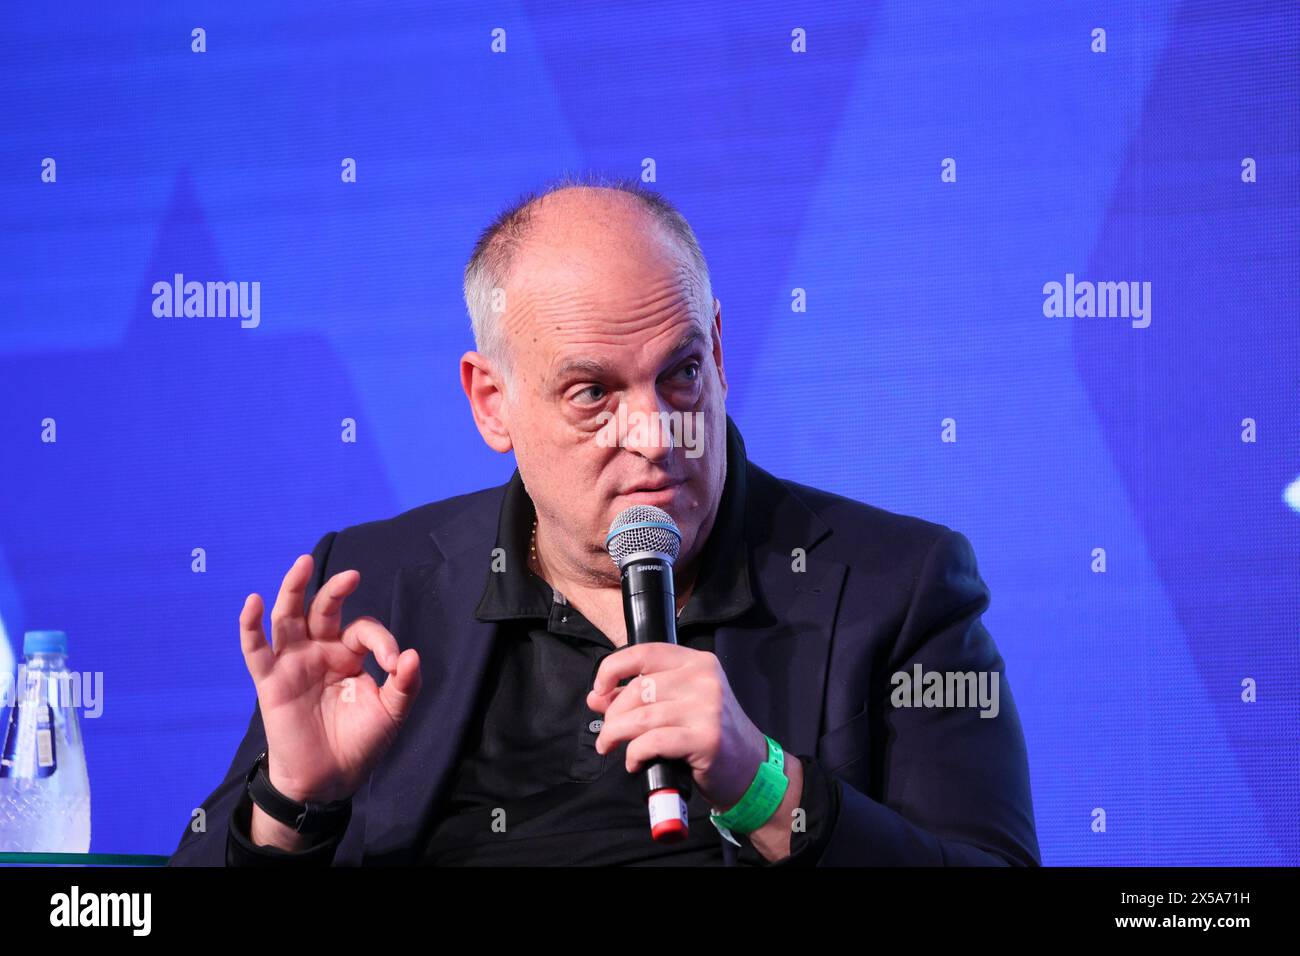 Sao Paulo, Sao Paulo, Brasil. 8th May, 2024. Sao Paulo (SP), 05/08/2024 Ã¢â‚¬' EVENT/SPORTS/SUMMIT/SP Ã¢â‚¬' Javier Tebas, president of La Liga, participates in a panel at the Sports Summit Sao Paulo 2024 - Panel Ã¢â‚¬Å“La Liga: building a global brandÃ¢â‚¬Â, with participation of Javier Tebas, president of La Liga, moderated by Bruno Rodrigues, journalist from CNN Brasil, in the 2nd edition of Sports Summit Sao Paulo 2024, a meeting point for the sports industry. The event takes place between May 7th and 9th, at the Hilton Morumbi Hotel, in the capital of Sao Paulo. (Credit Image: © Leco V Stock Photo